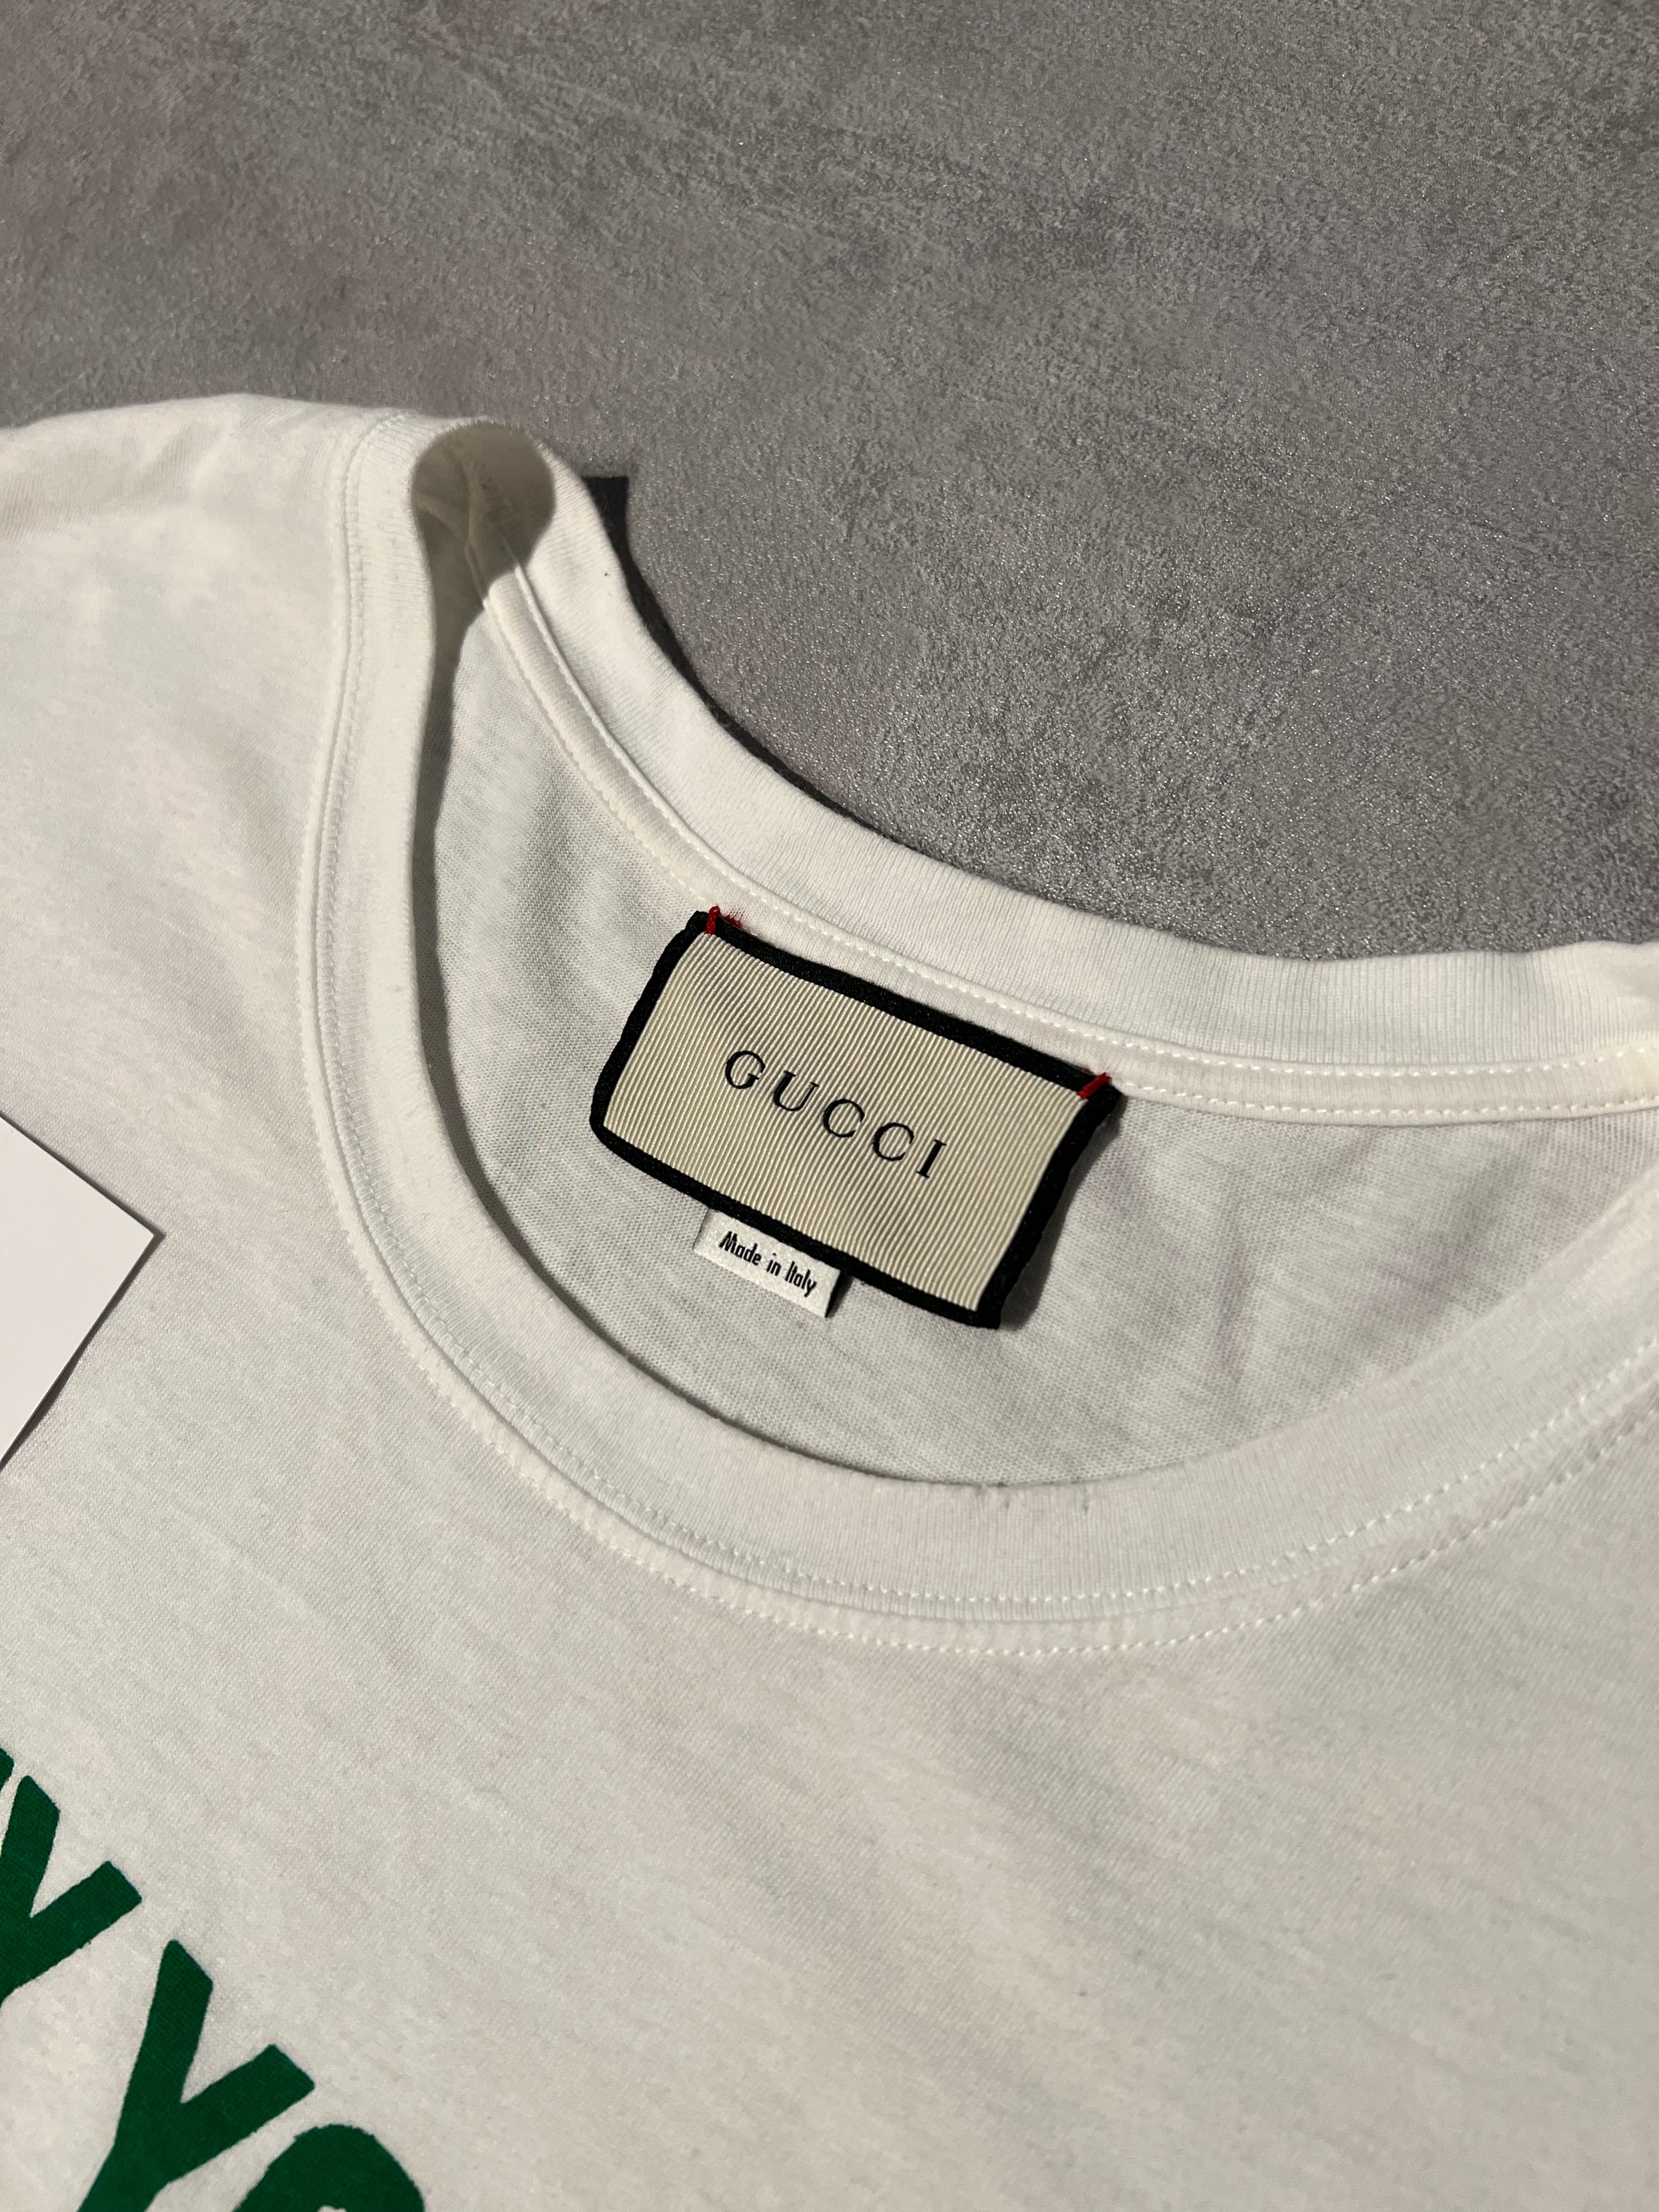 Gucci ‘Guccify Yourself’ T-Shirt